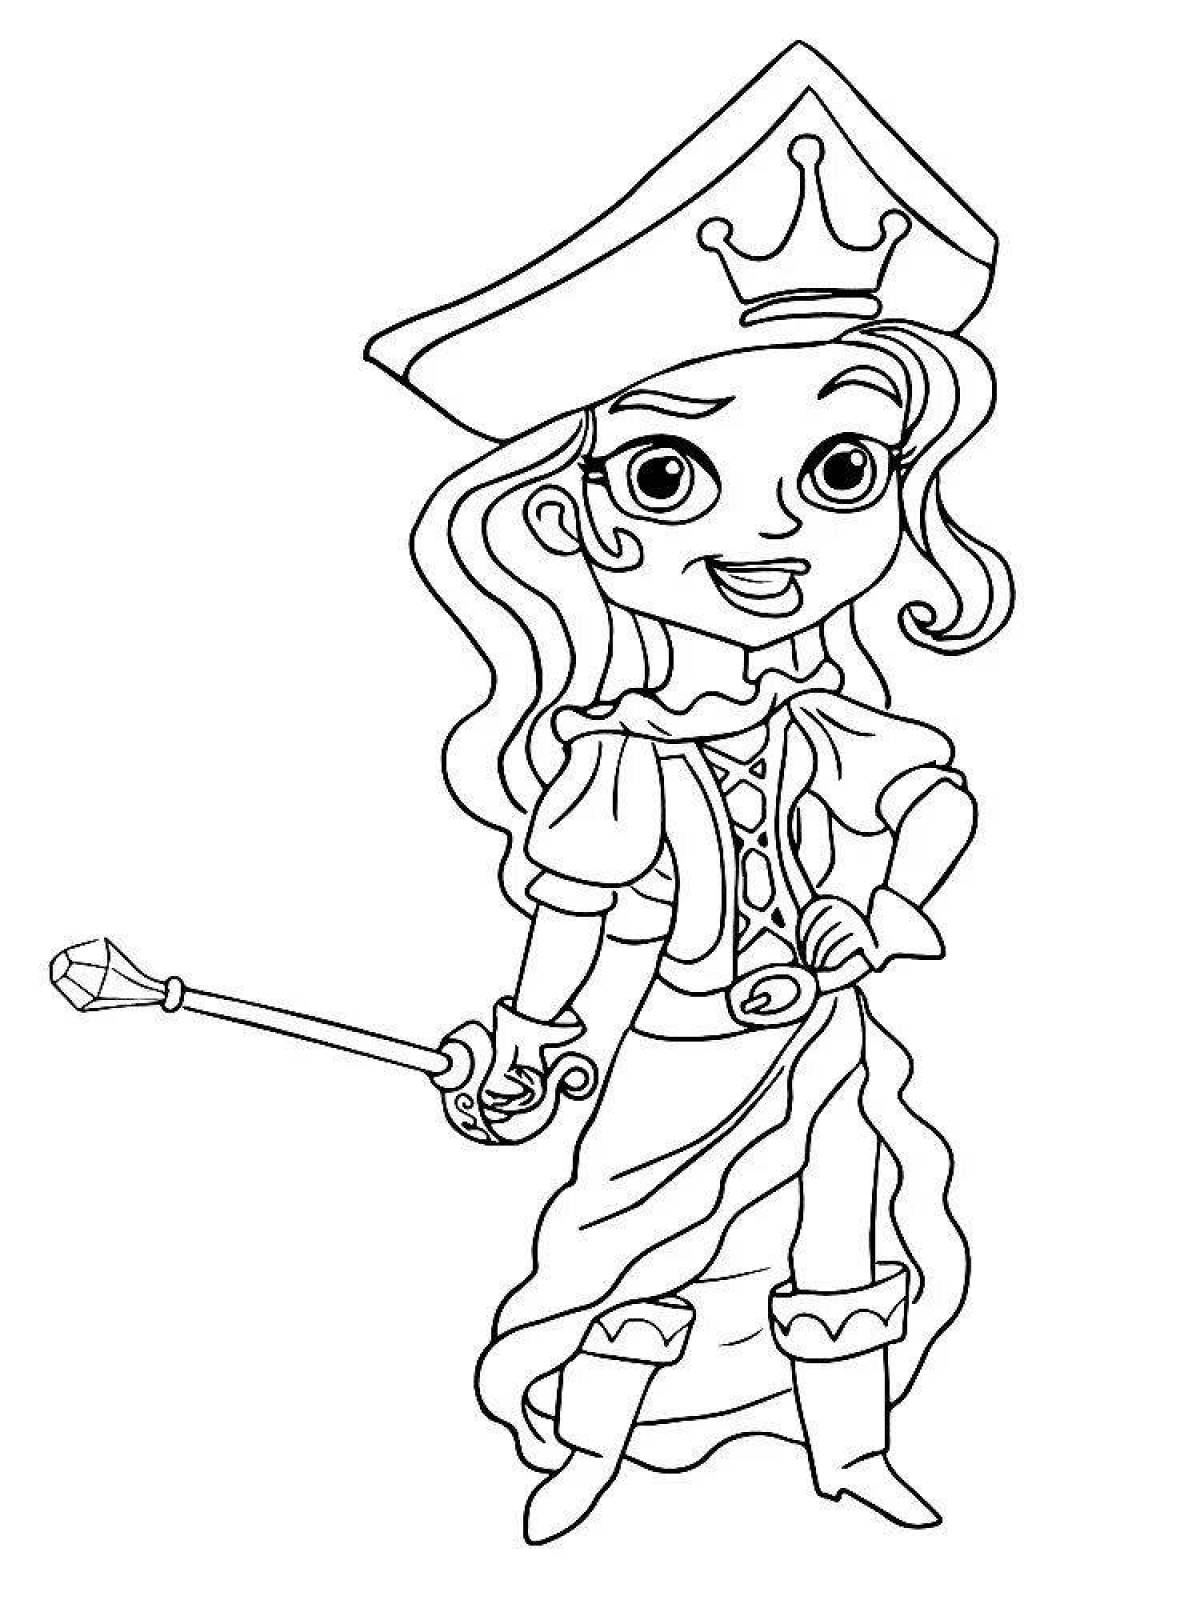 Naughty pirate coloring book